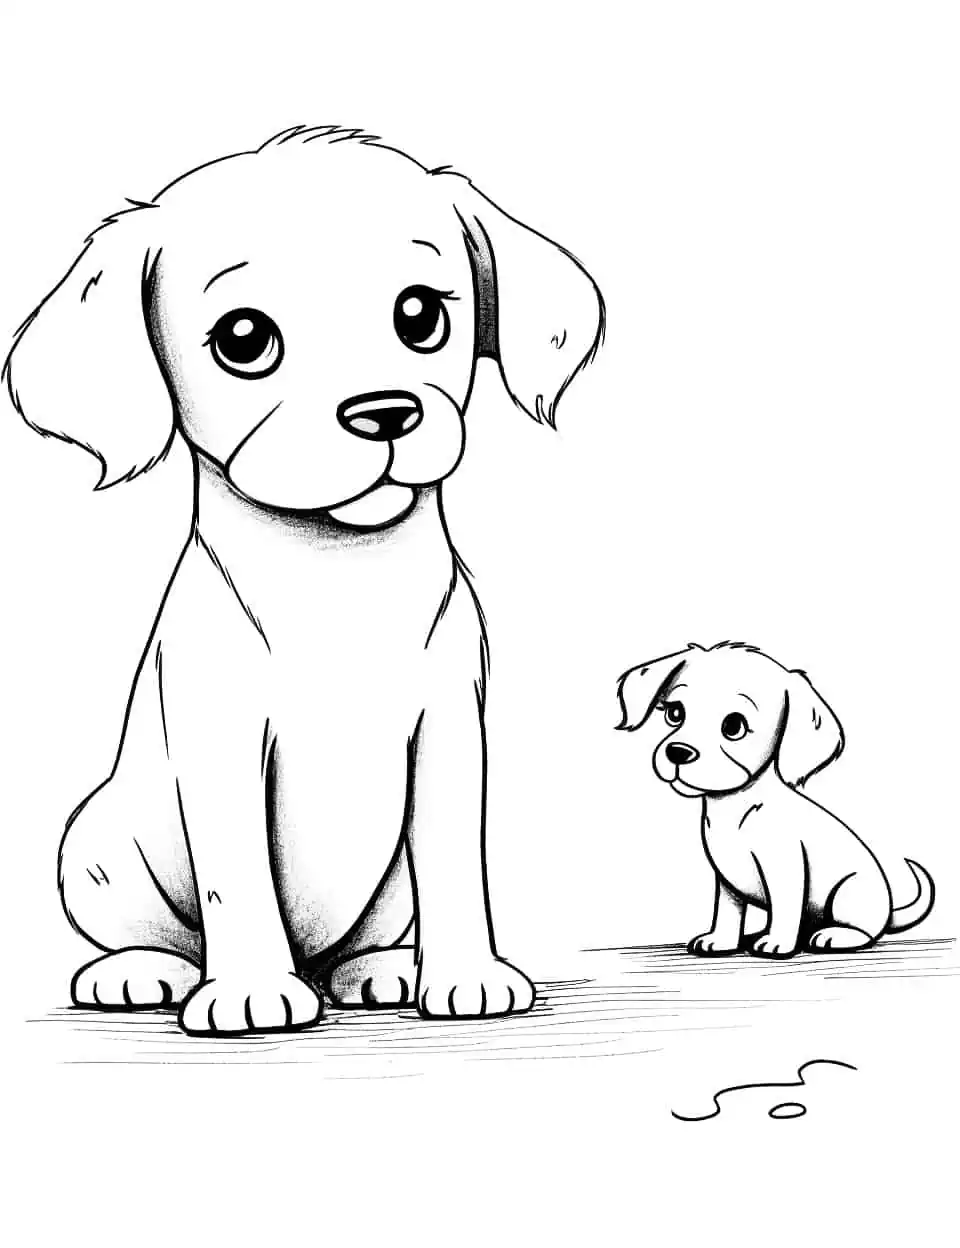 Baby Dog's First Steps Coloring Page - A baby dog (puppy) taking its first steps while its sibling watches.